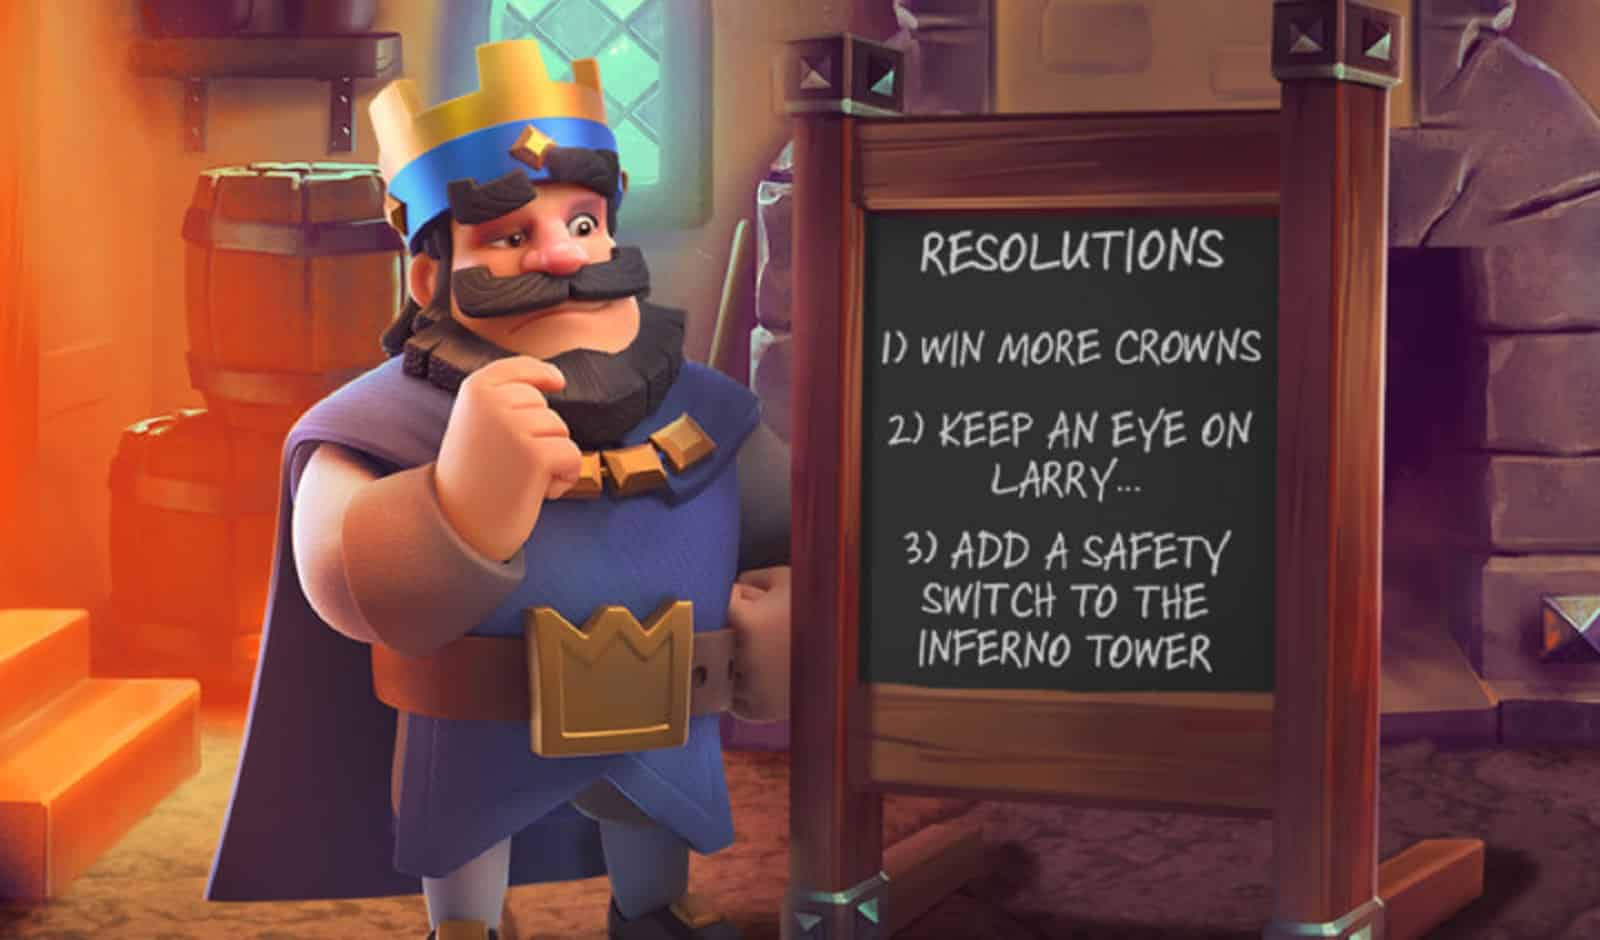 poster of clash royale featuring the king